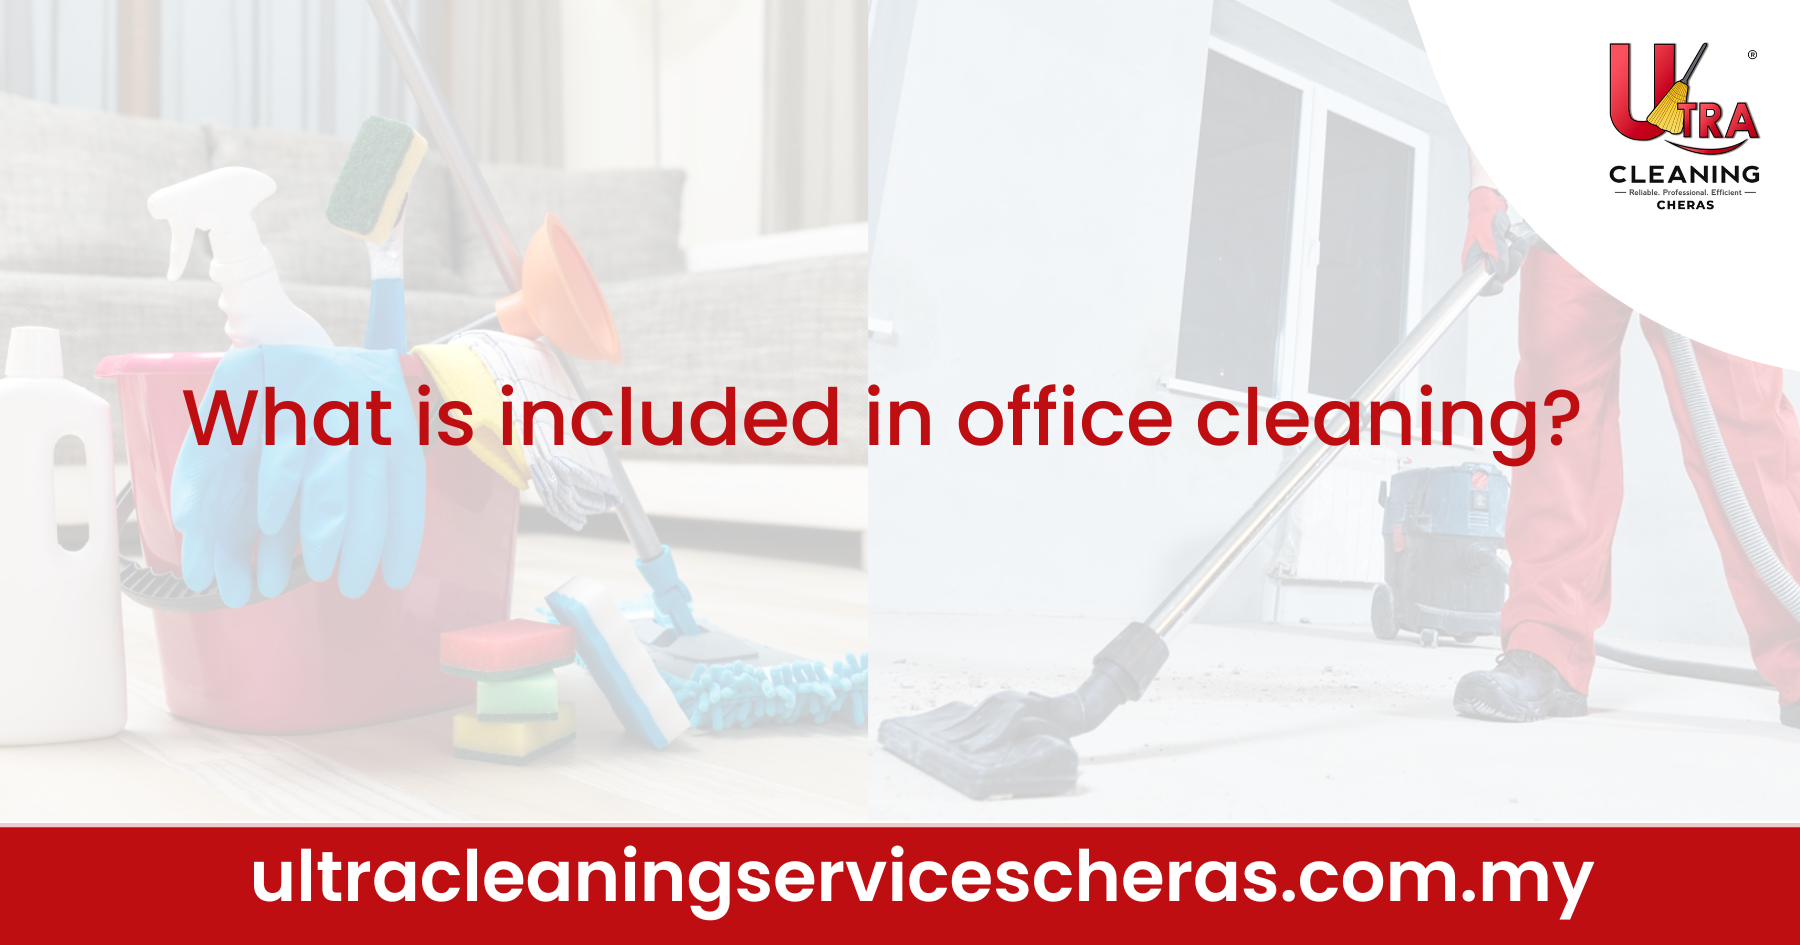 What is included in office cleaning?